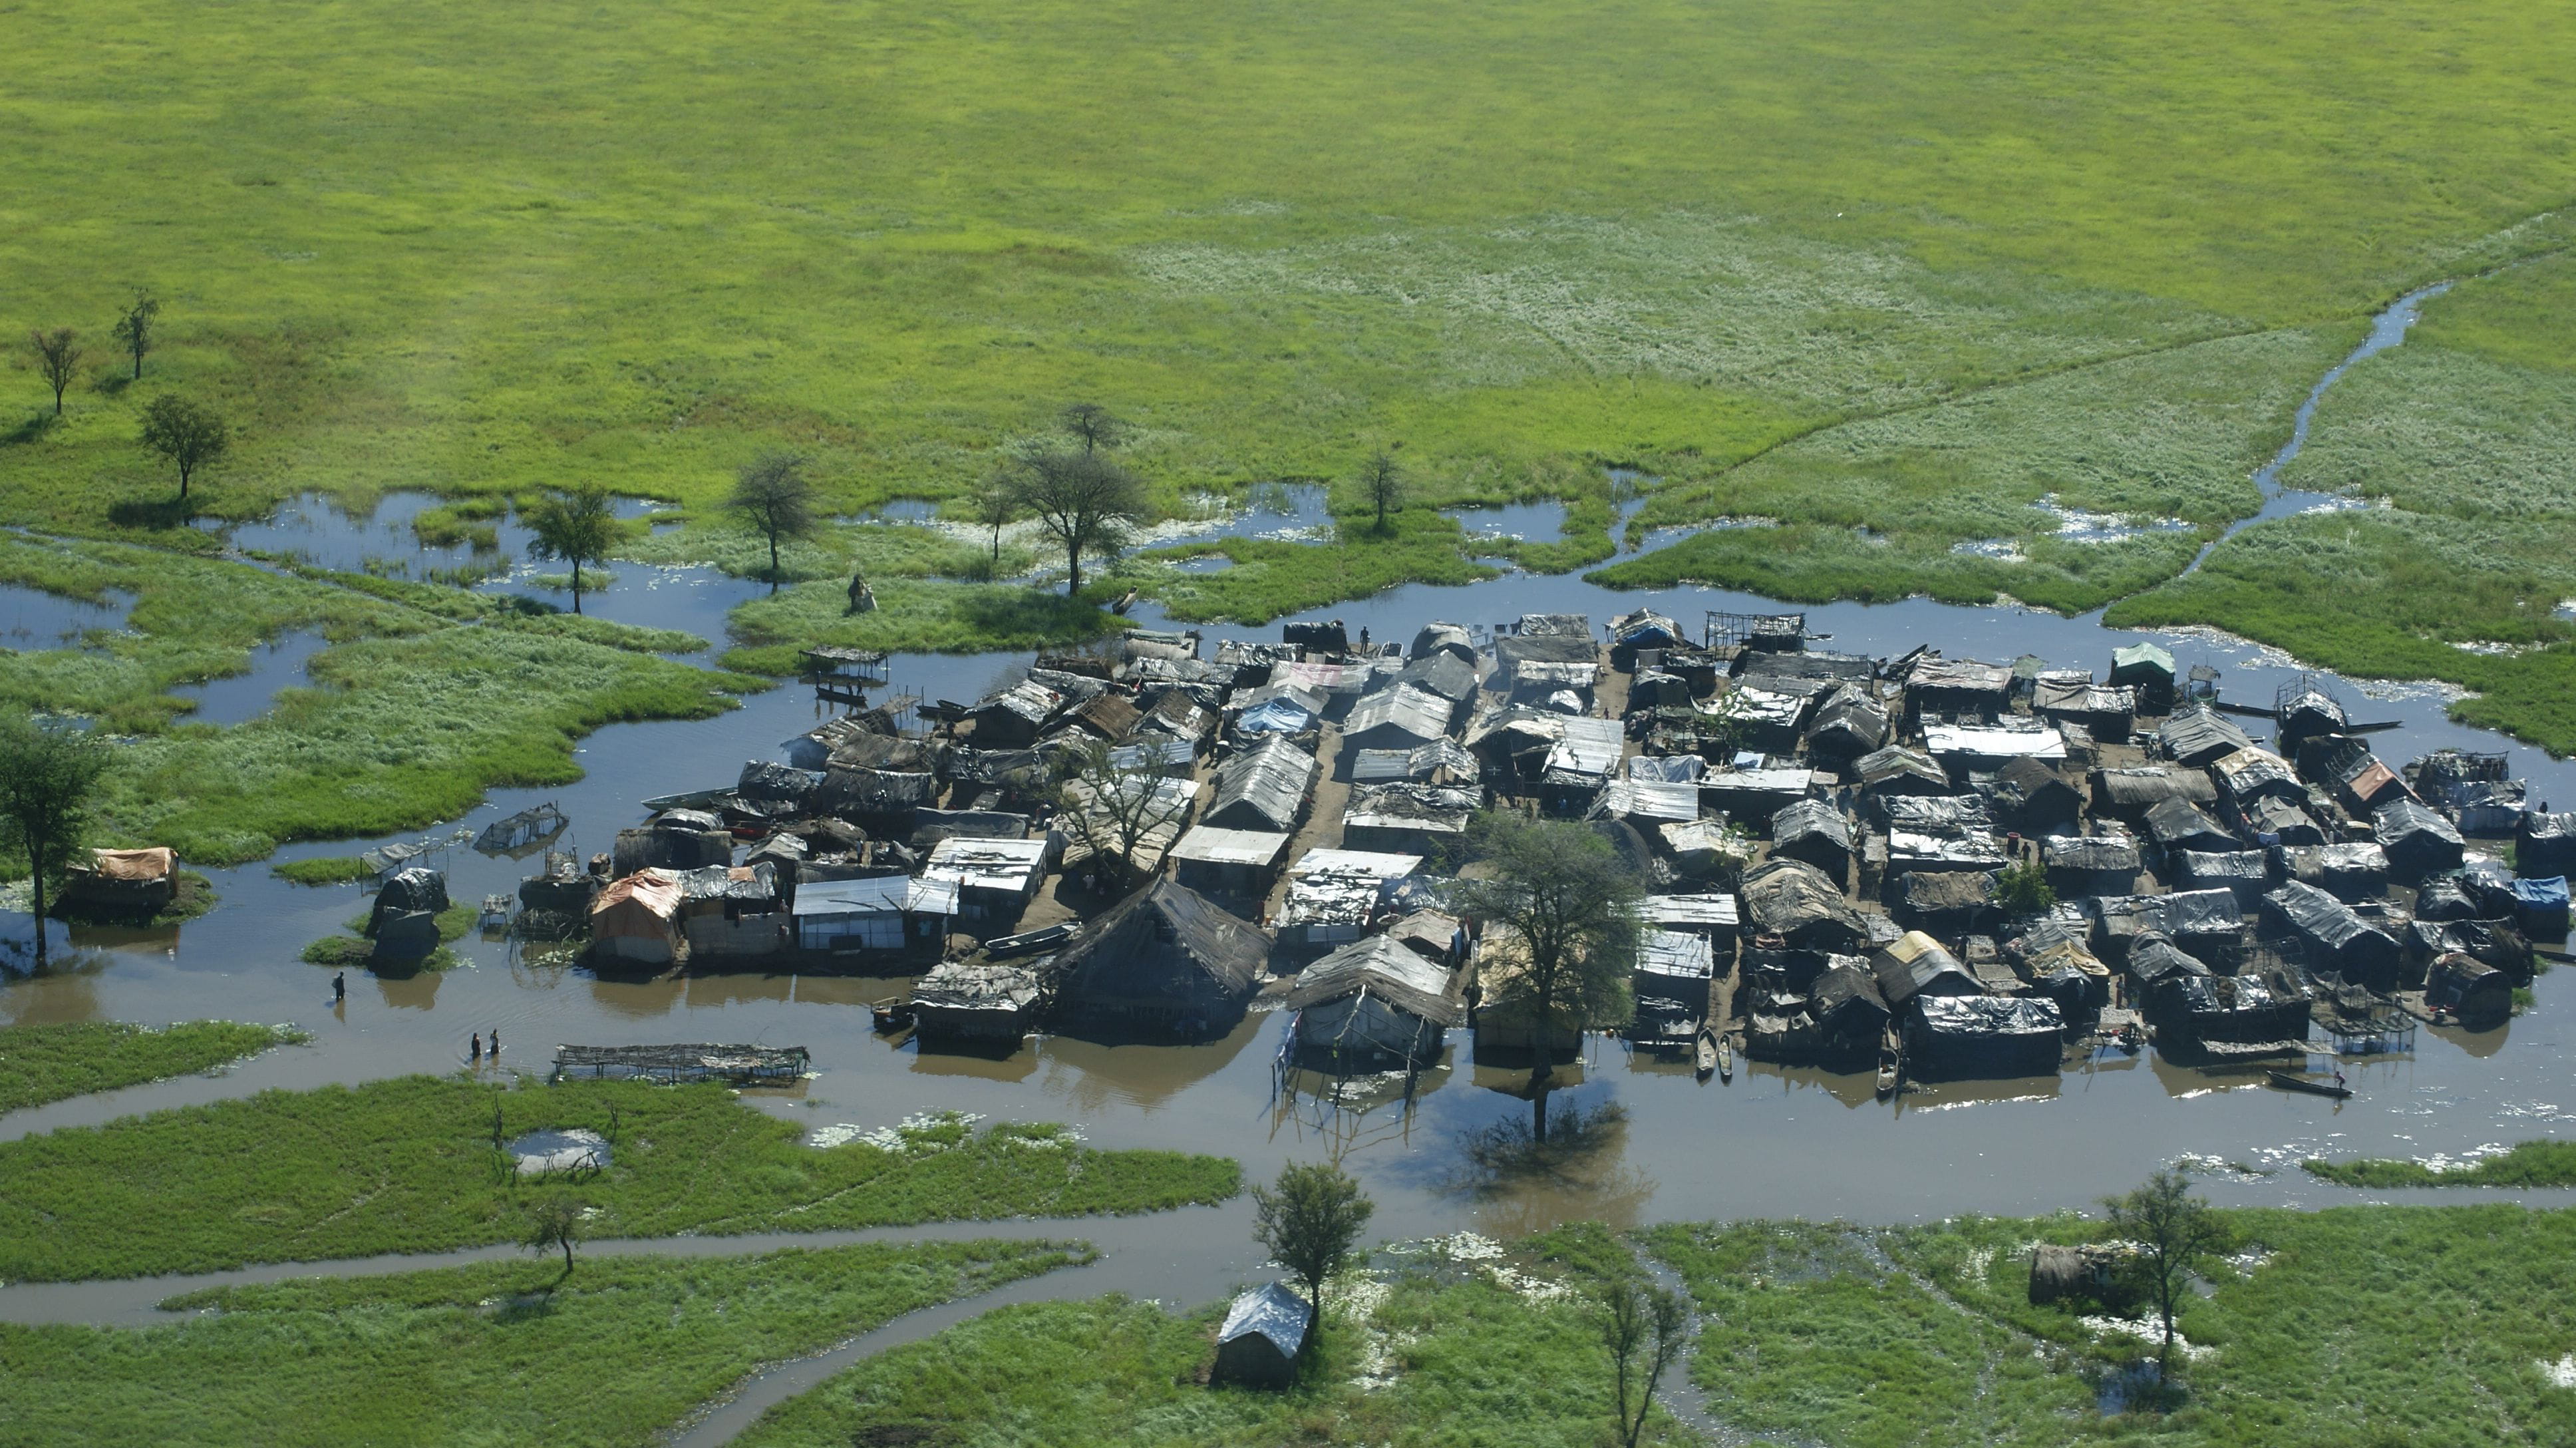 Aerial shot of a flooded village surrounded by a green field.